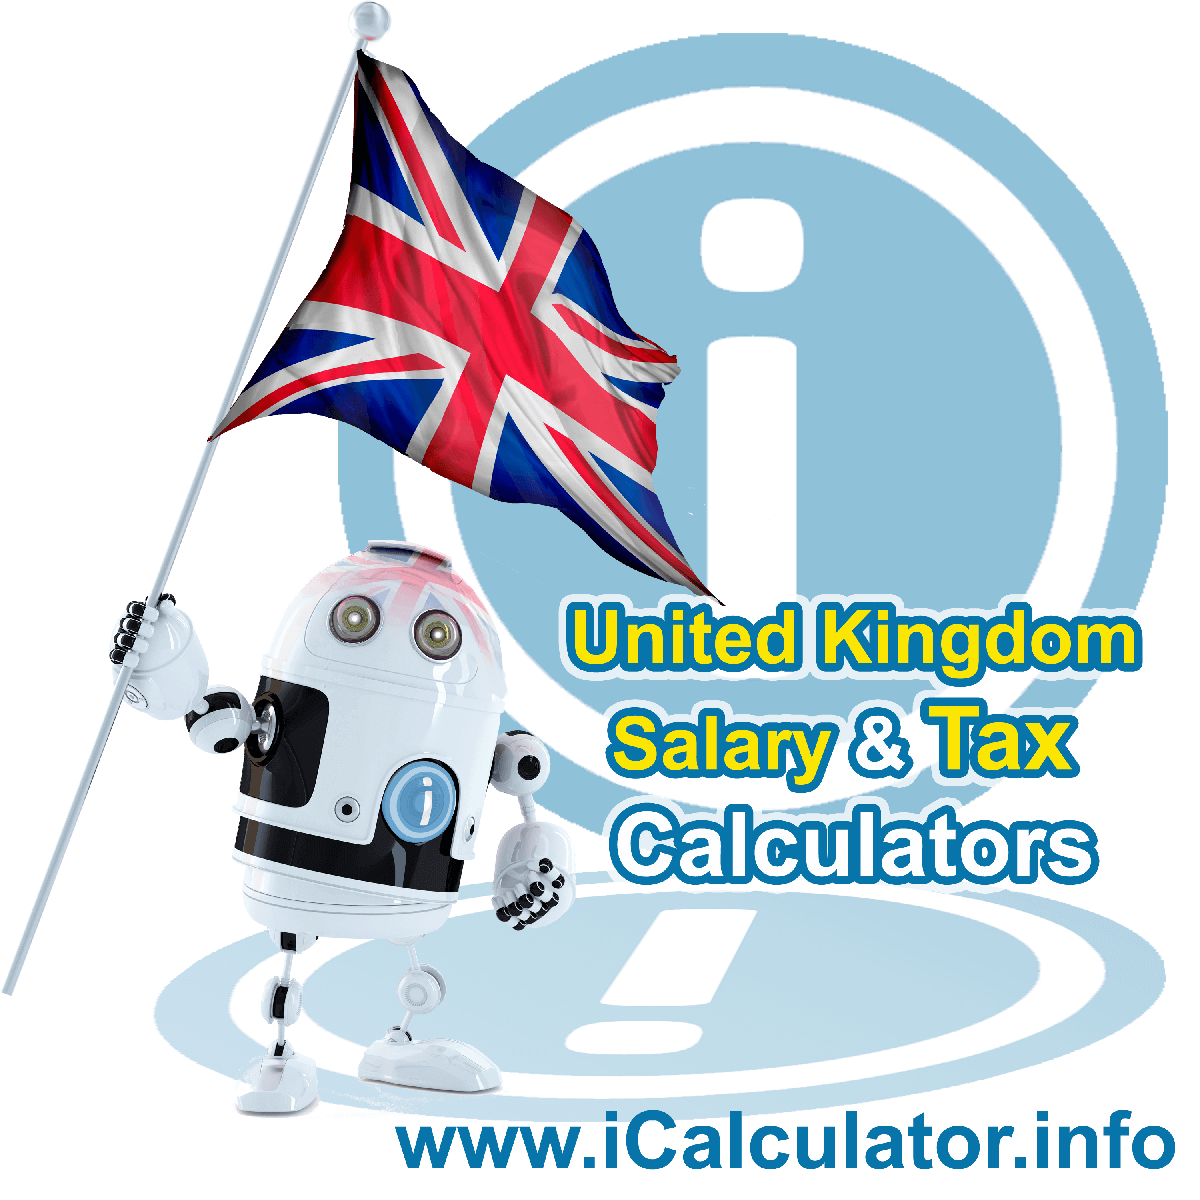 UK Salary and Tax Calculator. This image shows the United Kingdom flag and information relating to the tax formula for the UK Salary and Tax Calculator